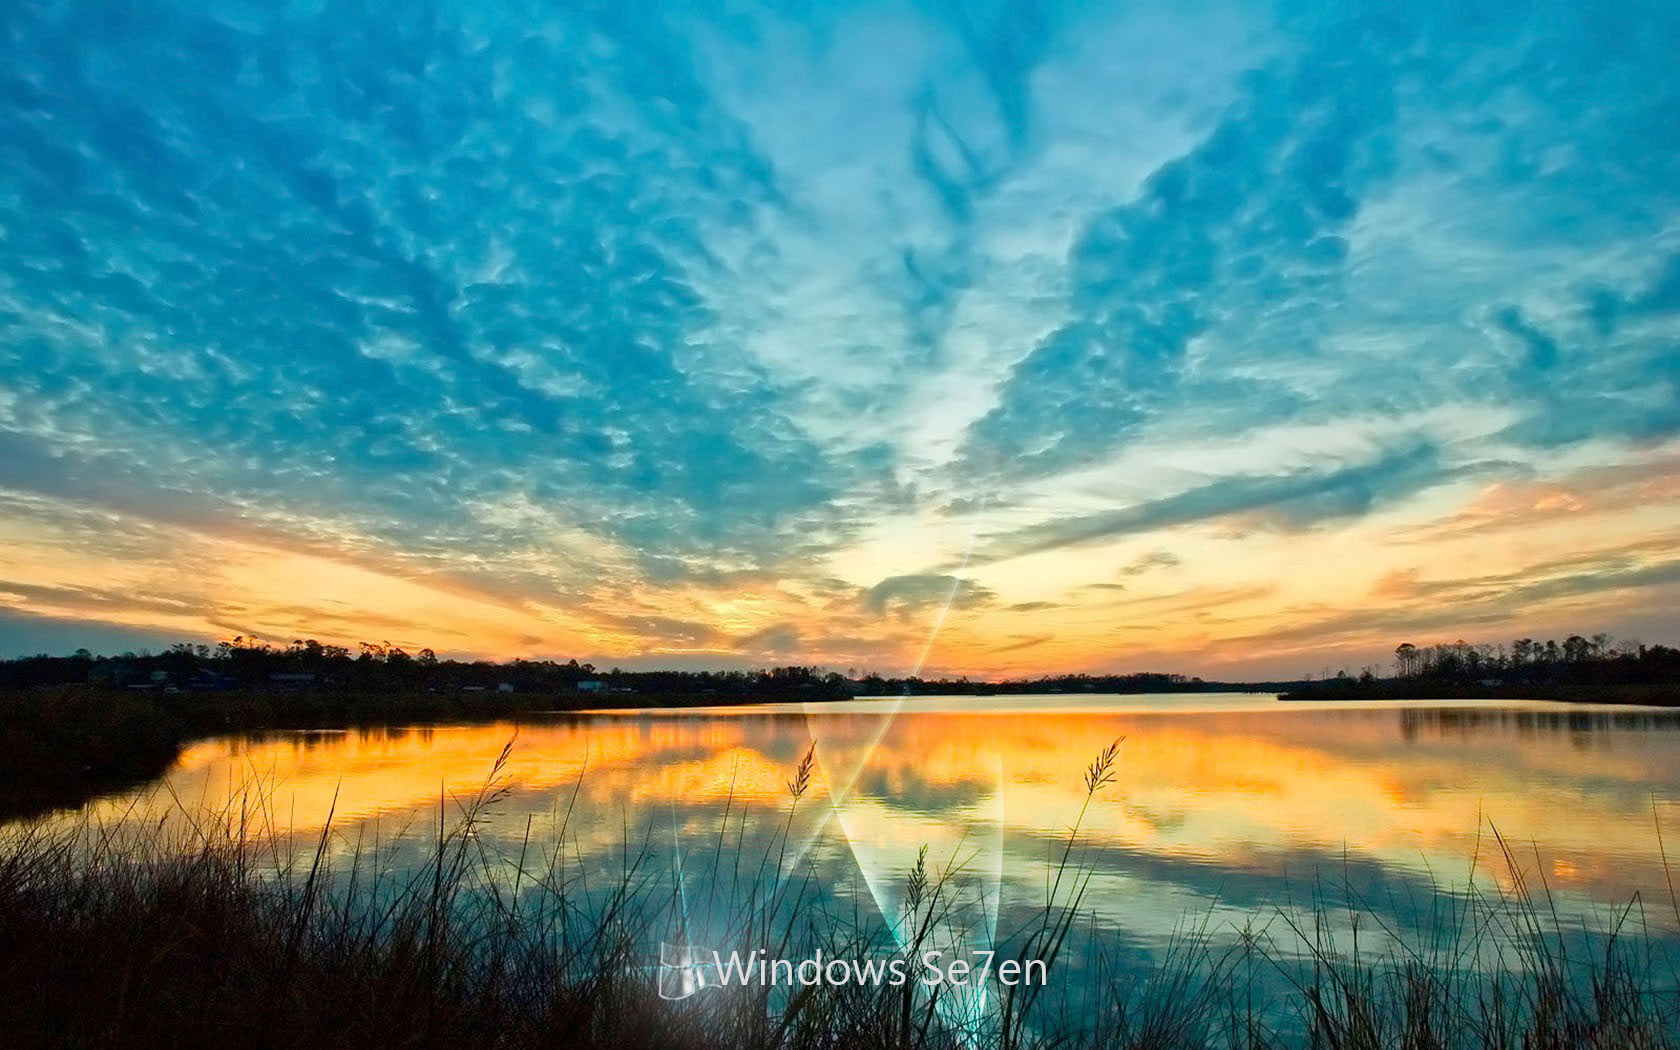 Hd Wallpapers for windows Laptop Nature Widescreen Ultimate free